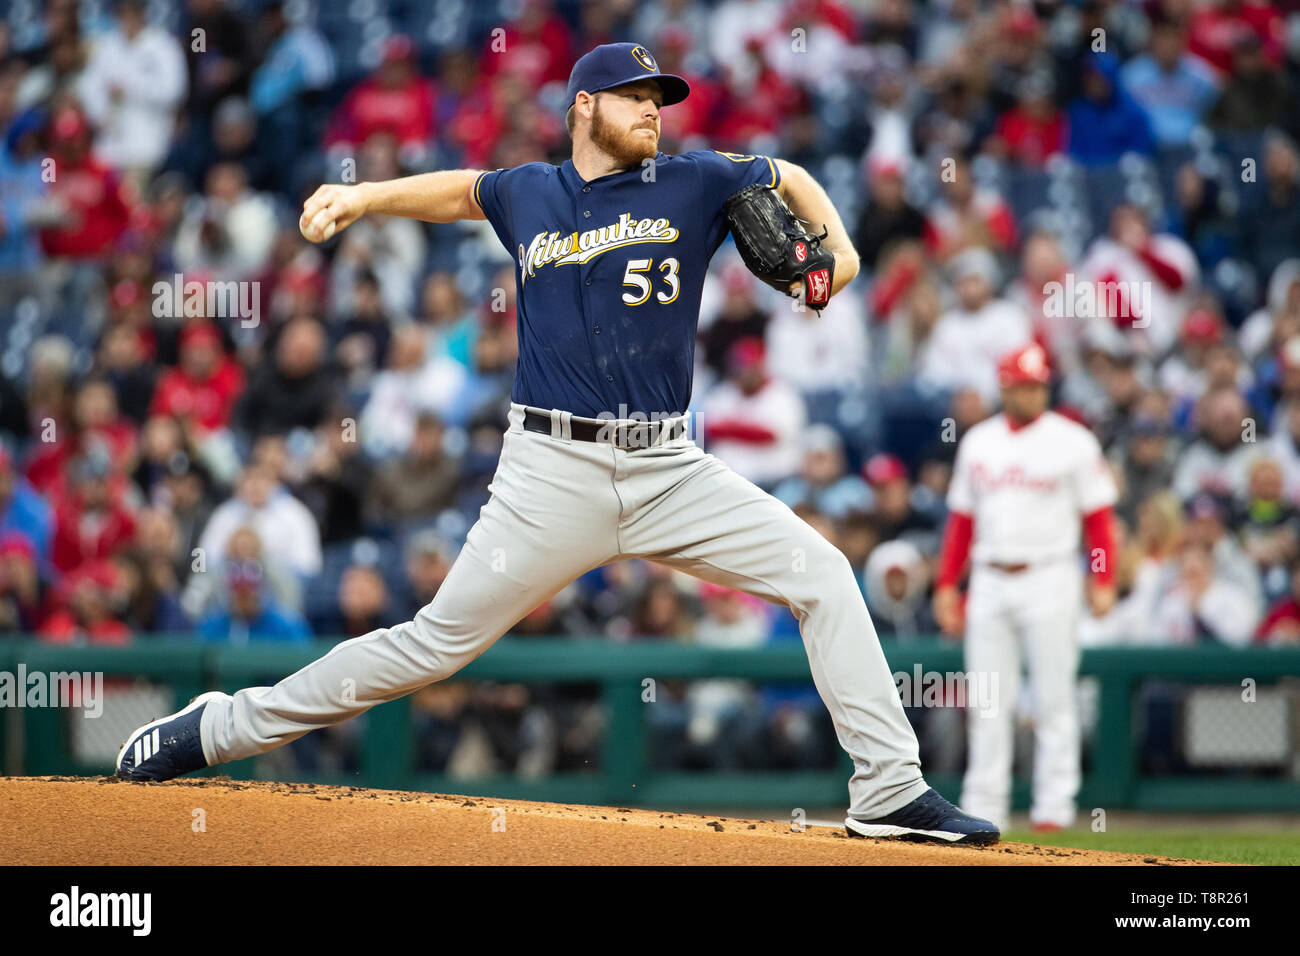 Brandon Woodruff pitches seven scoreless innings to lift NL Central-leading  Brewers over Pirates 7-3 - ABC News